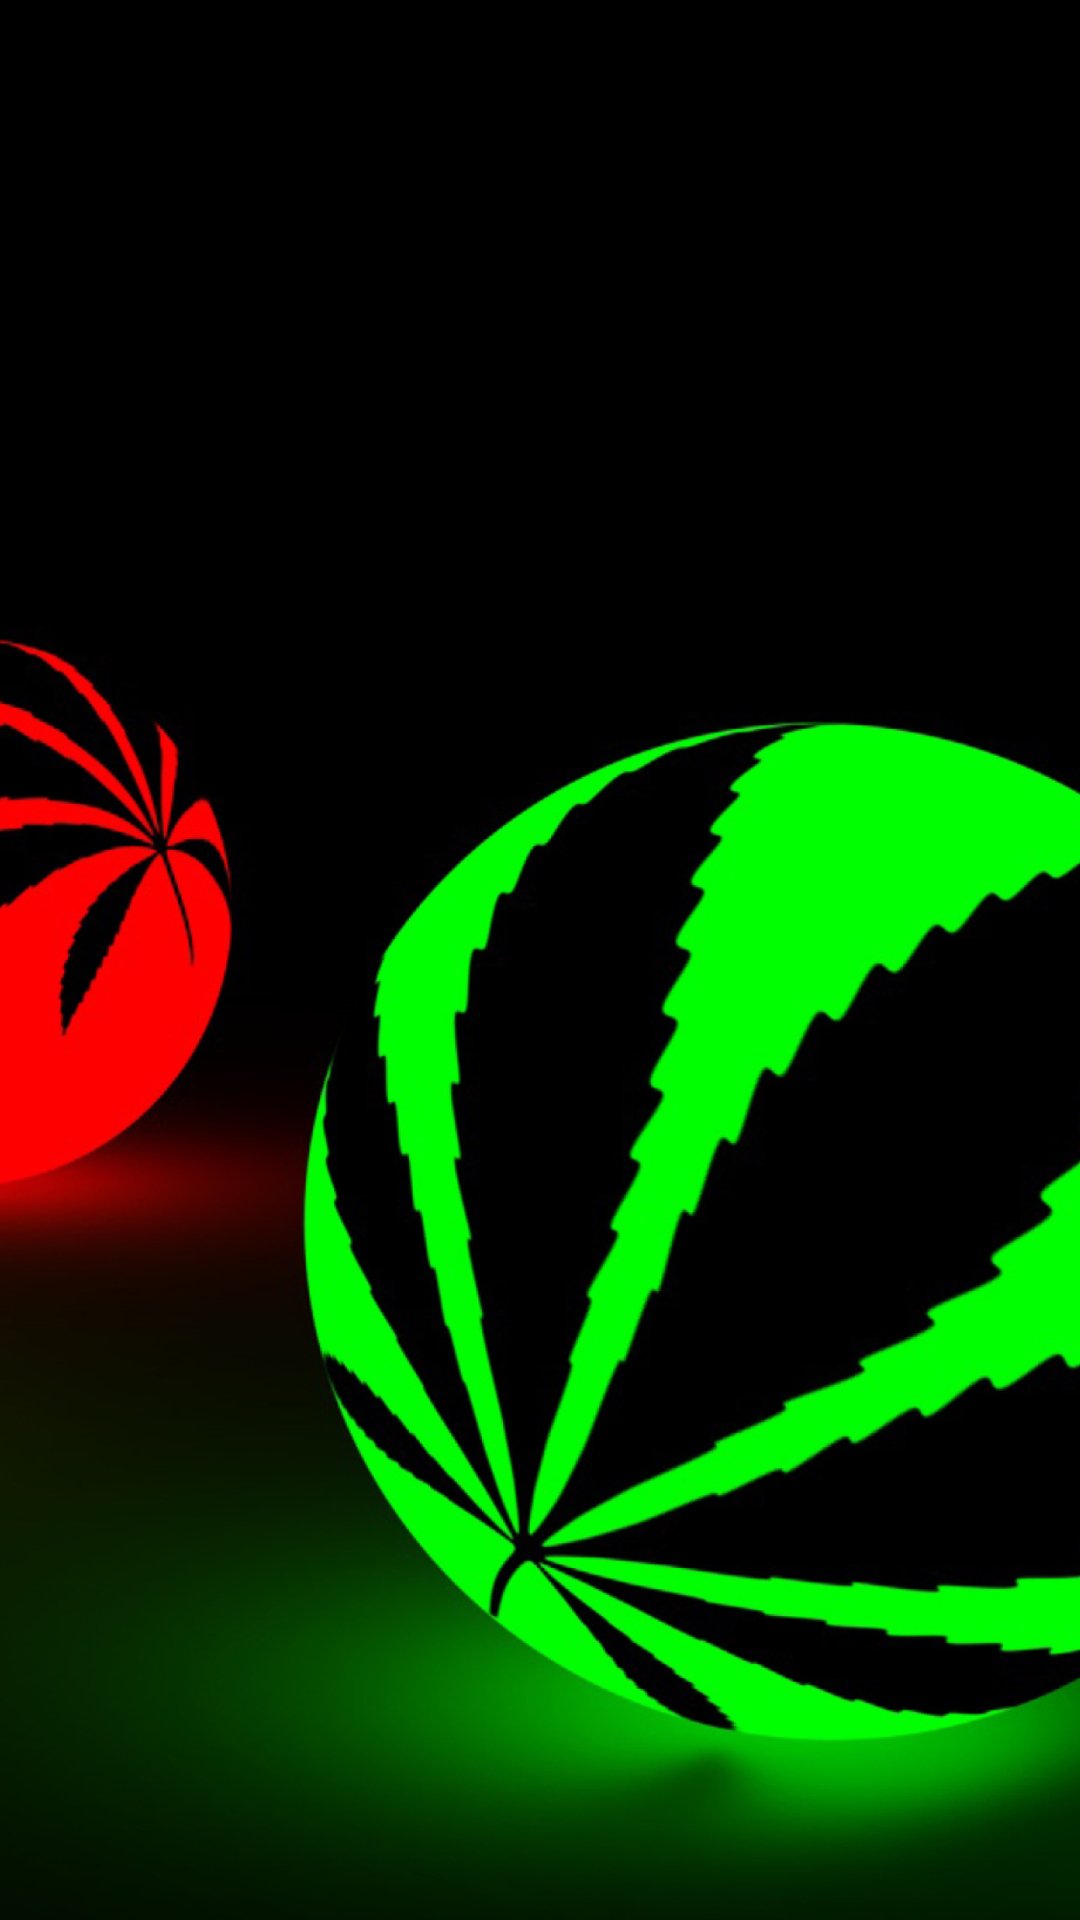 Neon Weed Balls Wallpaper for 1080x1920